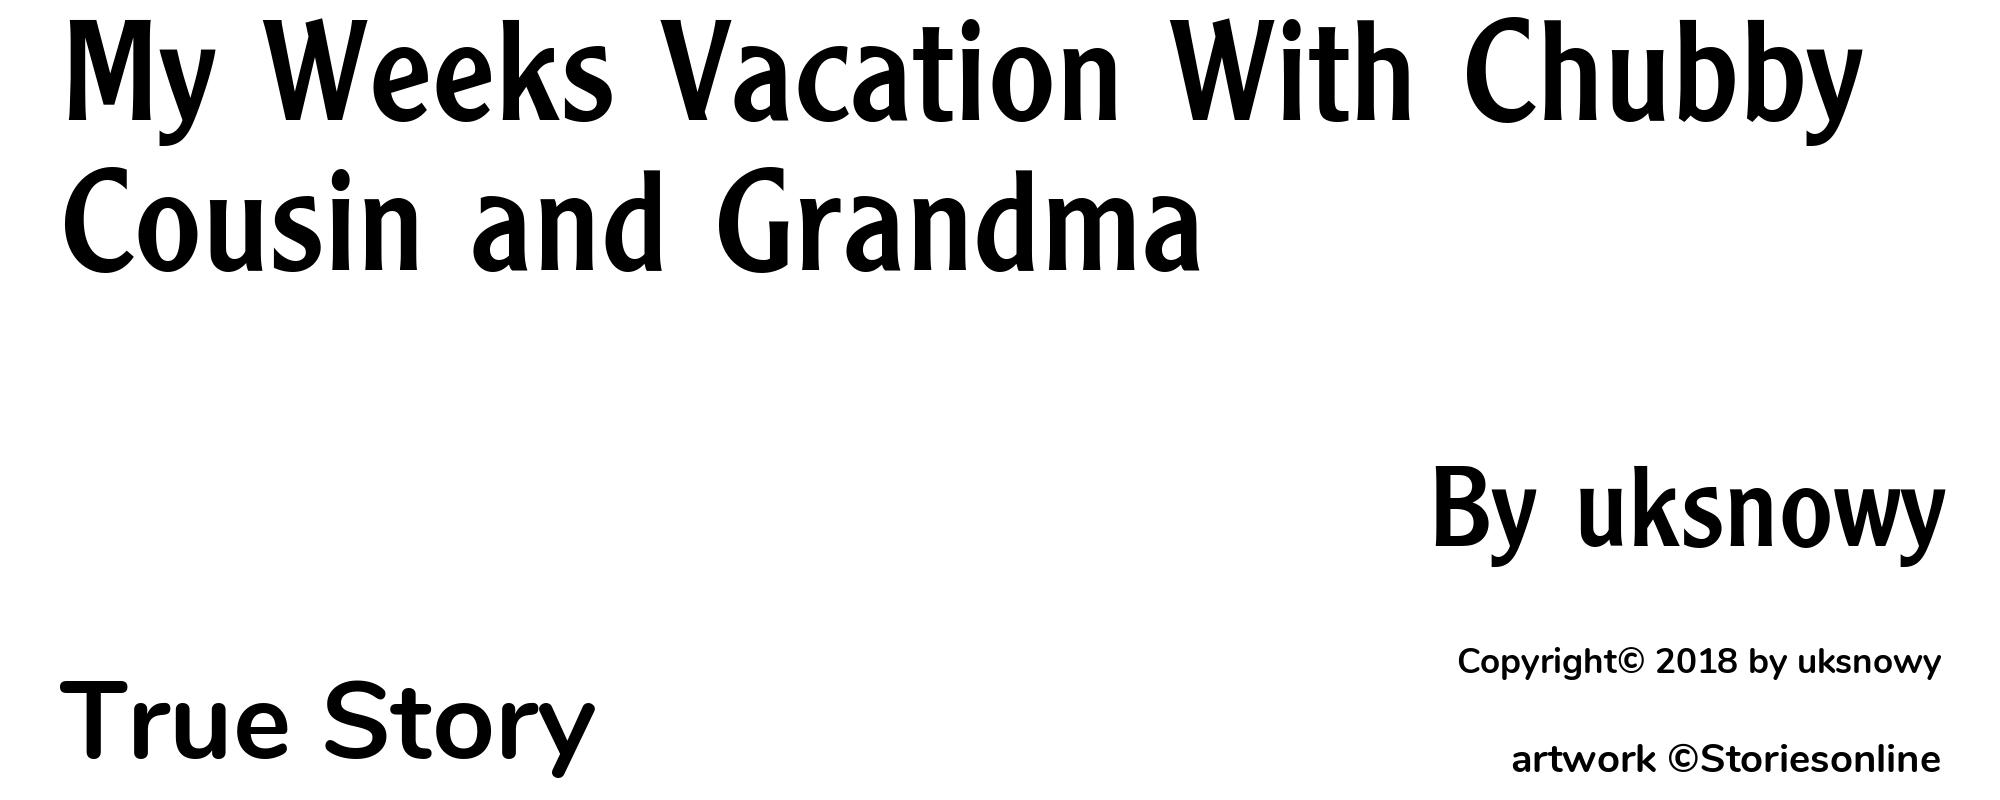 My Weeks Vacation With Chubby Cousin and Grandma - Cover